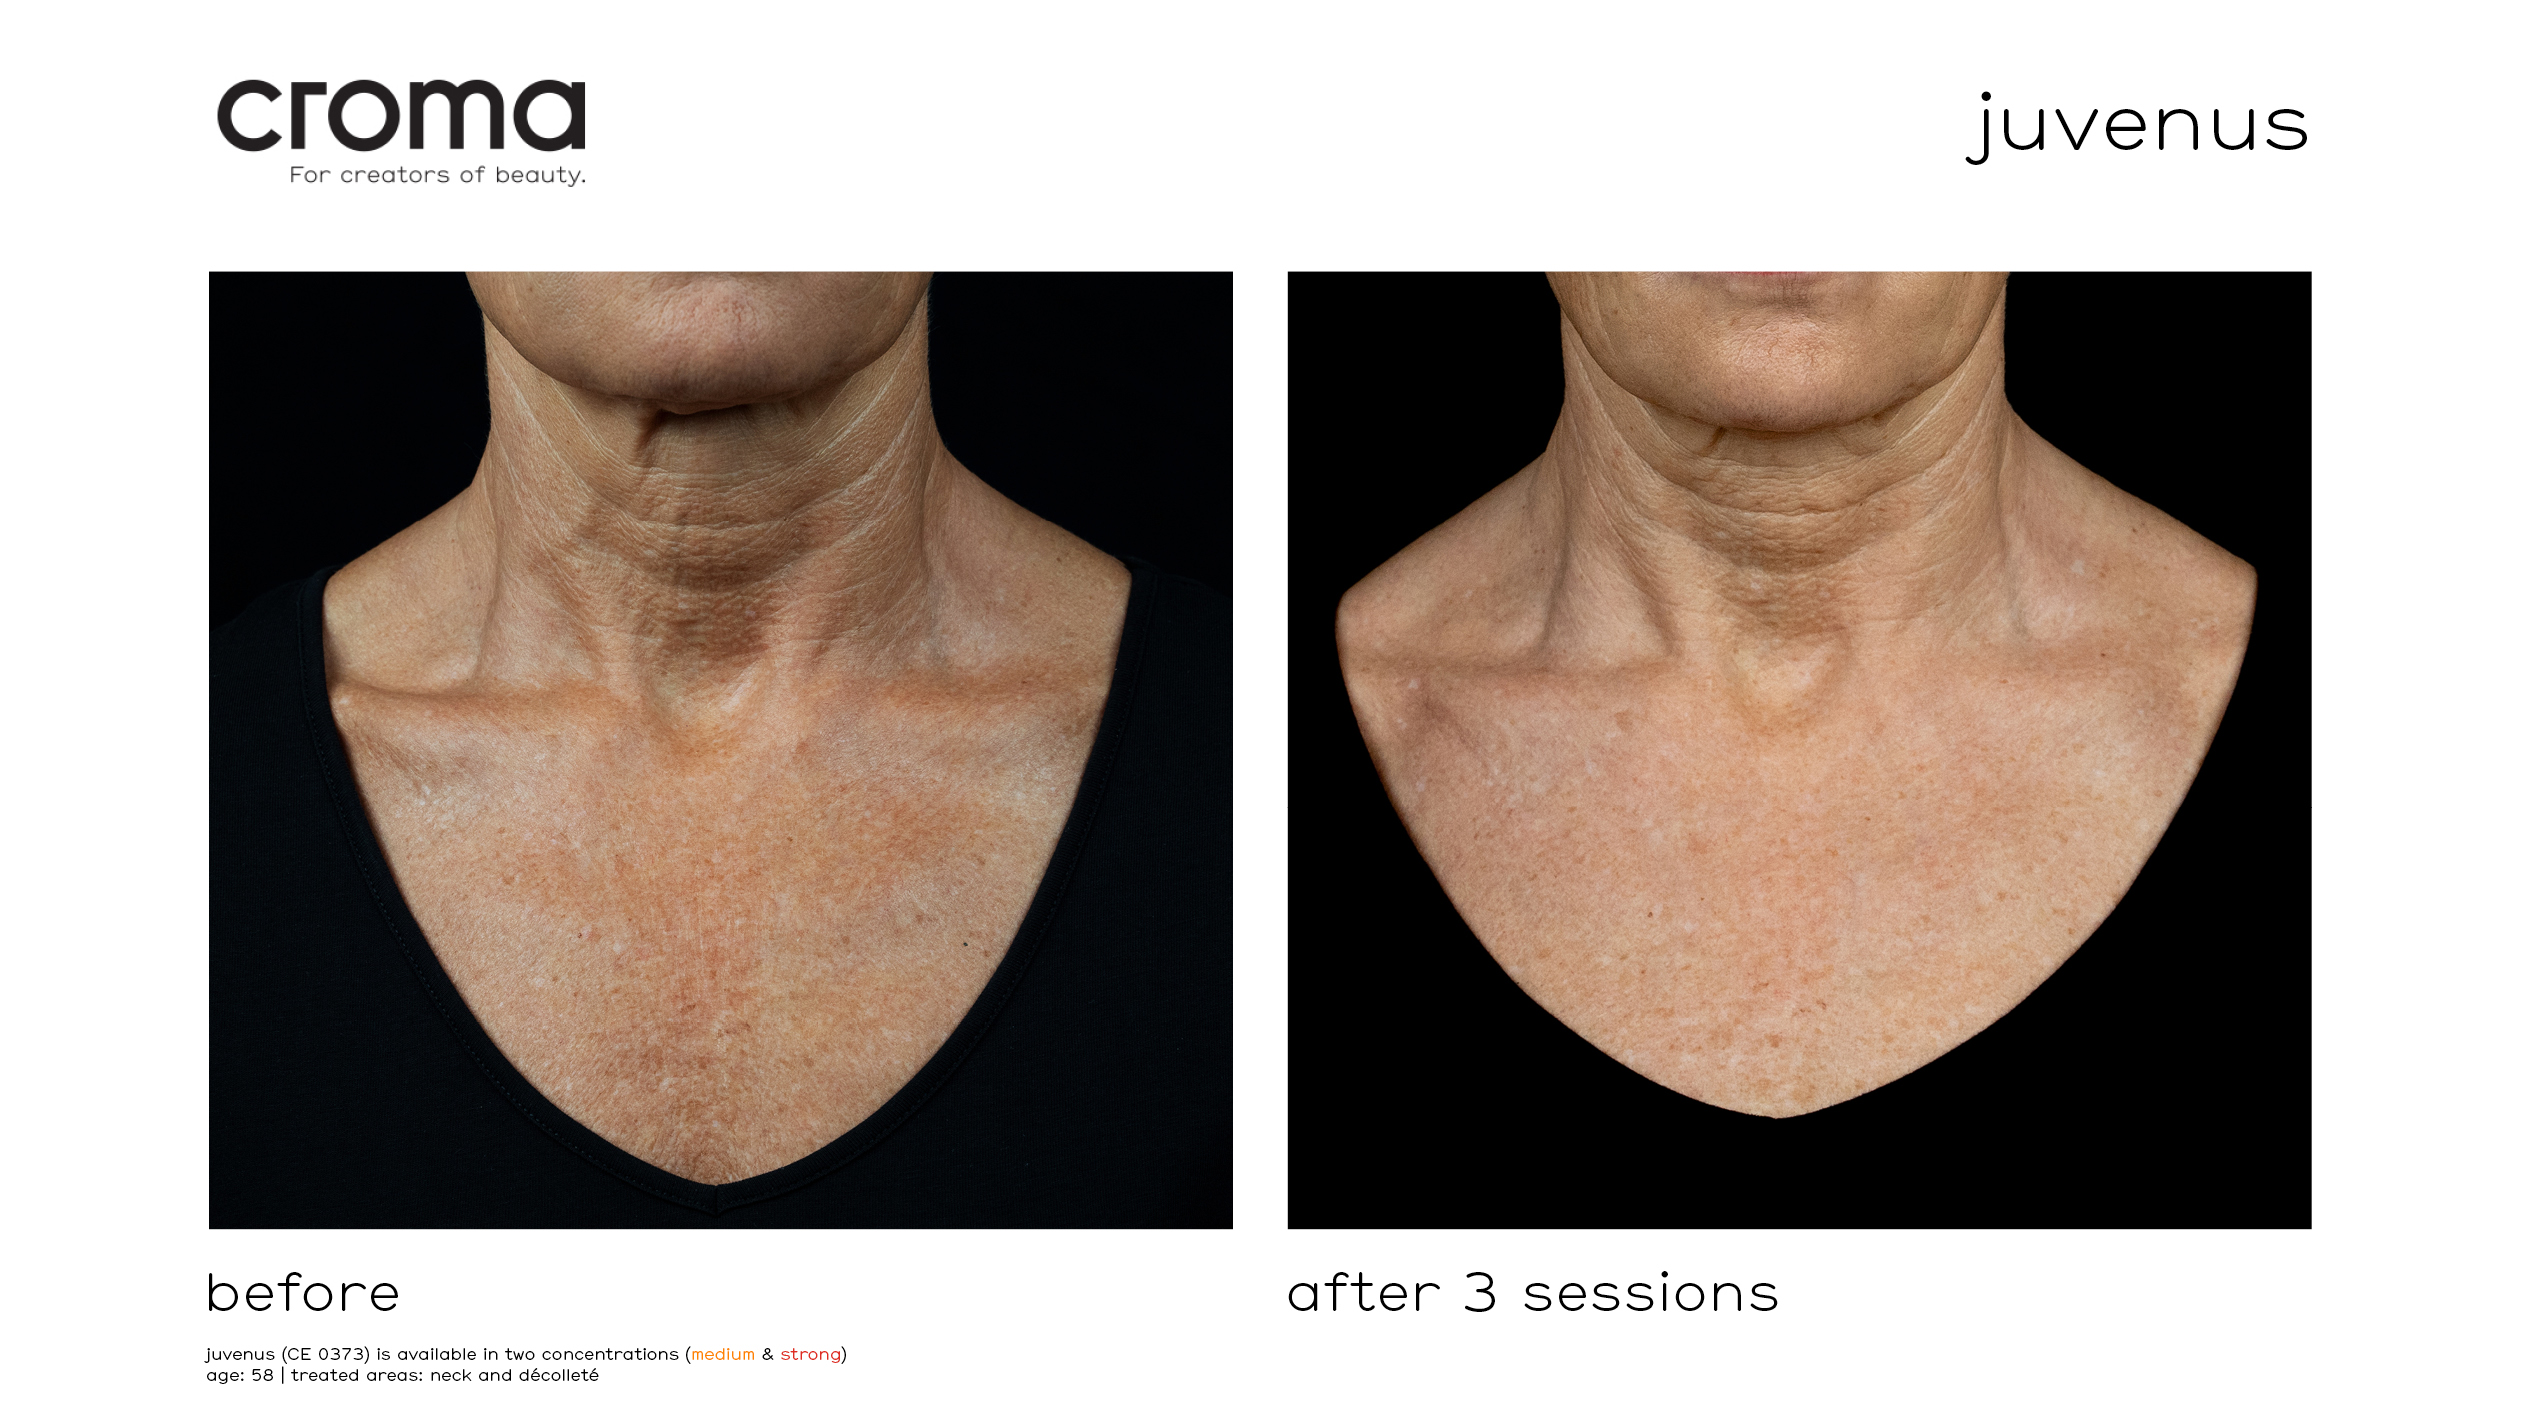 before-after3sessions-juvenus-p1_ppt_frontal